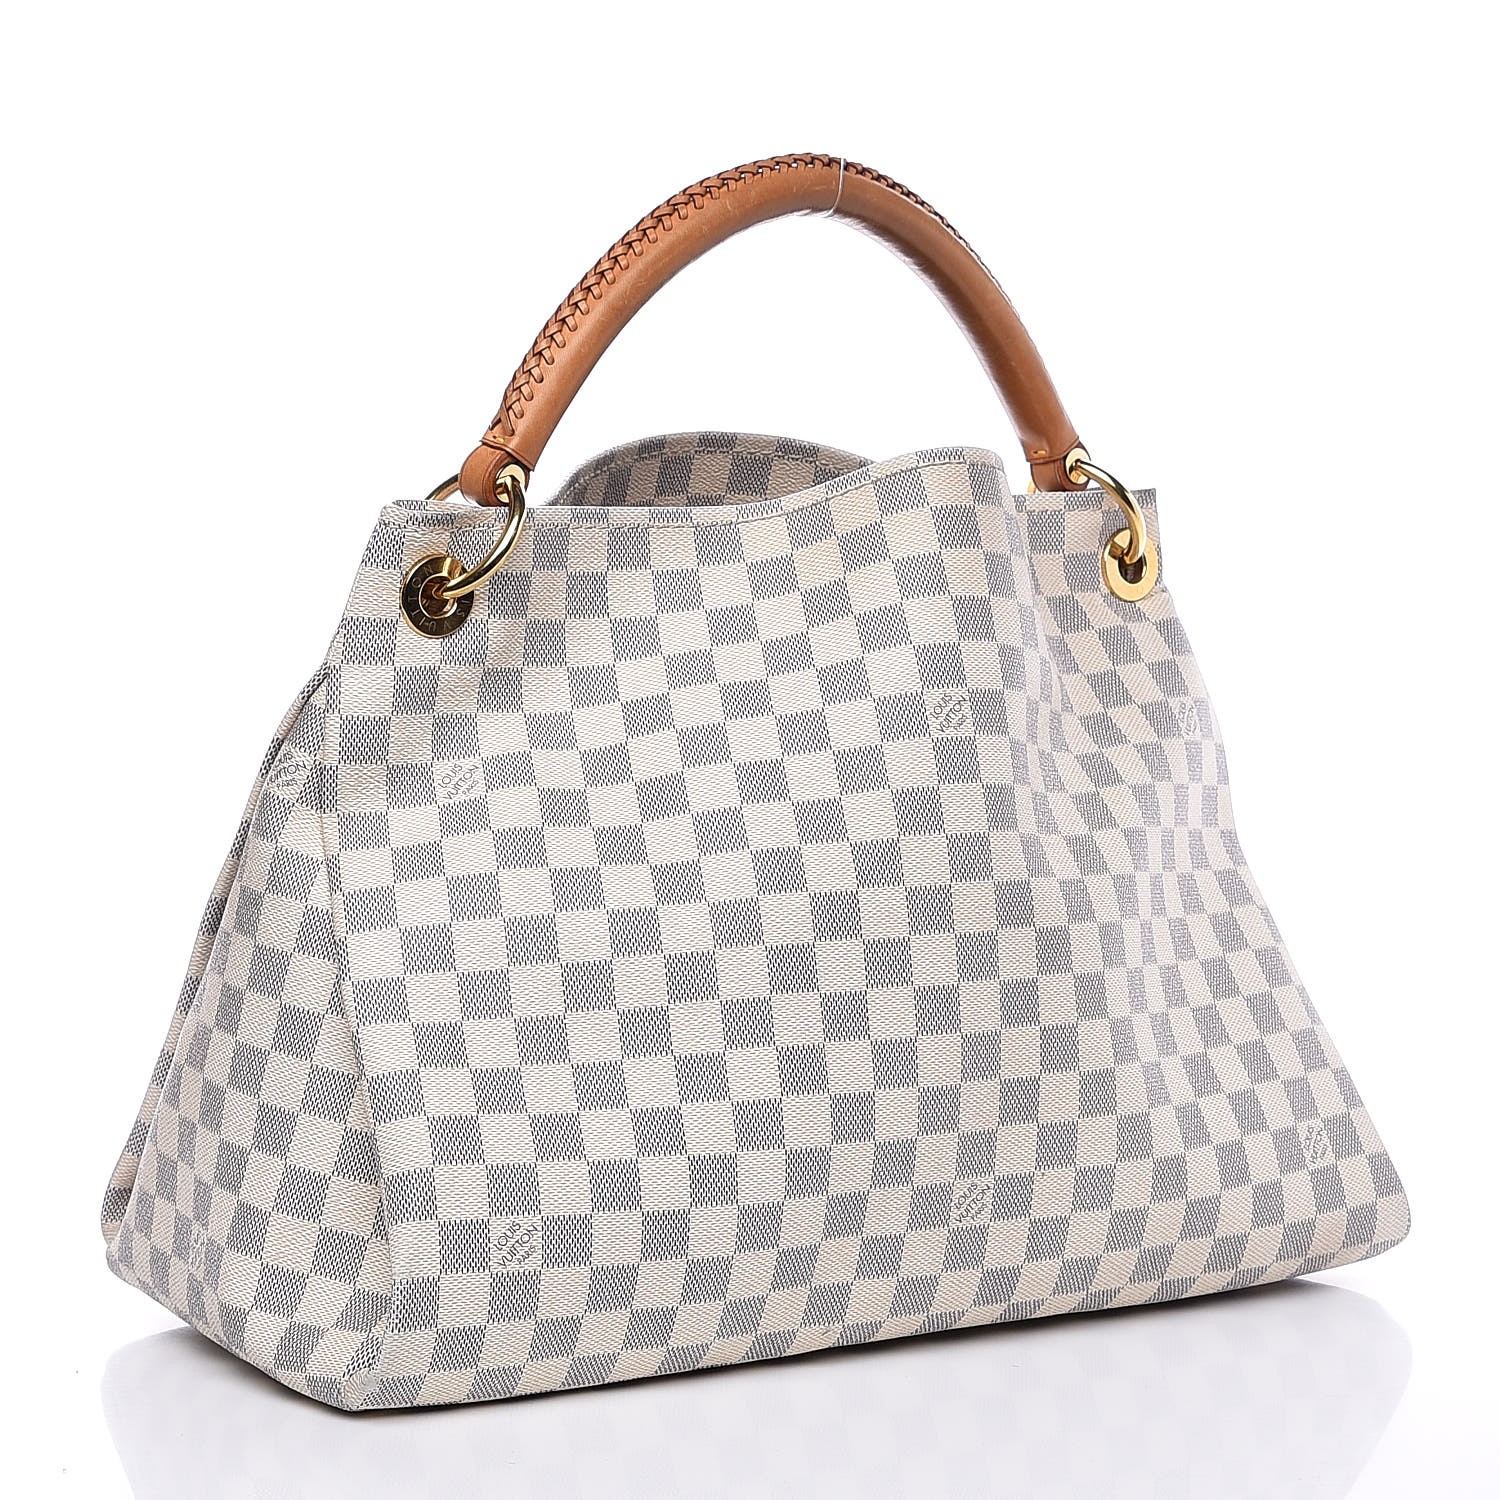 Louis Vuitton White And Blue Damier Azur Coated Canvas Artsy MM